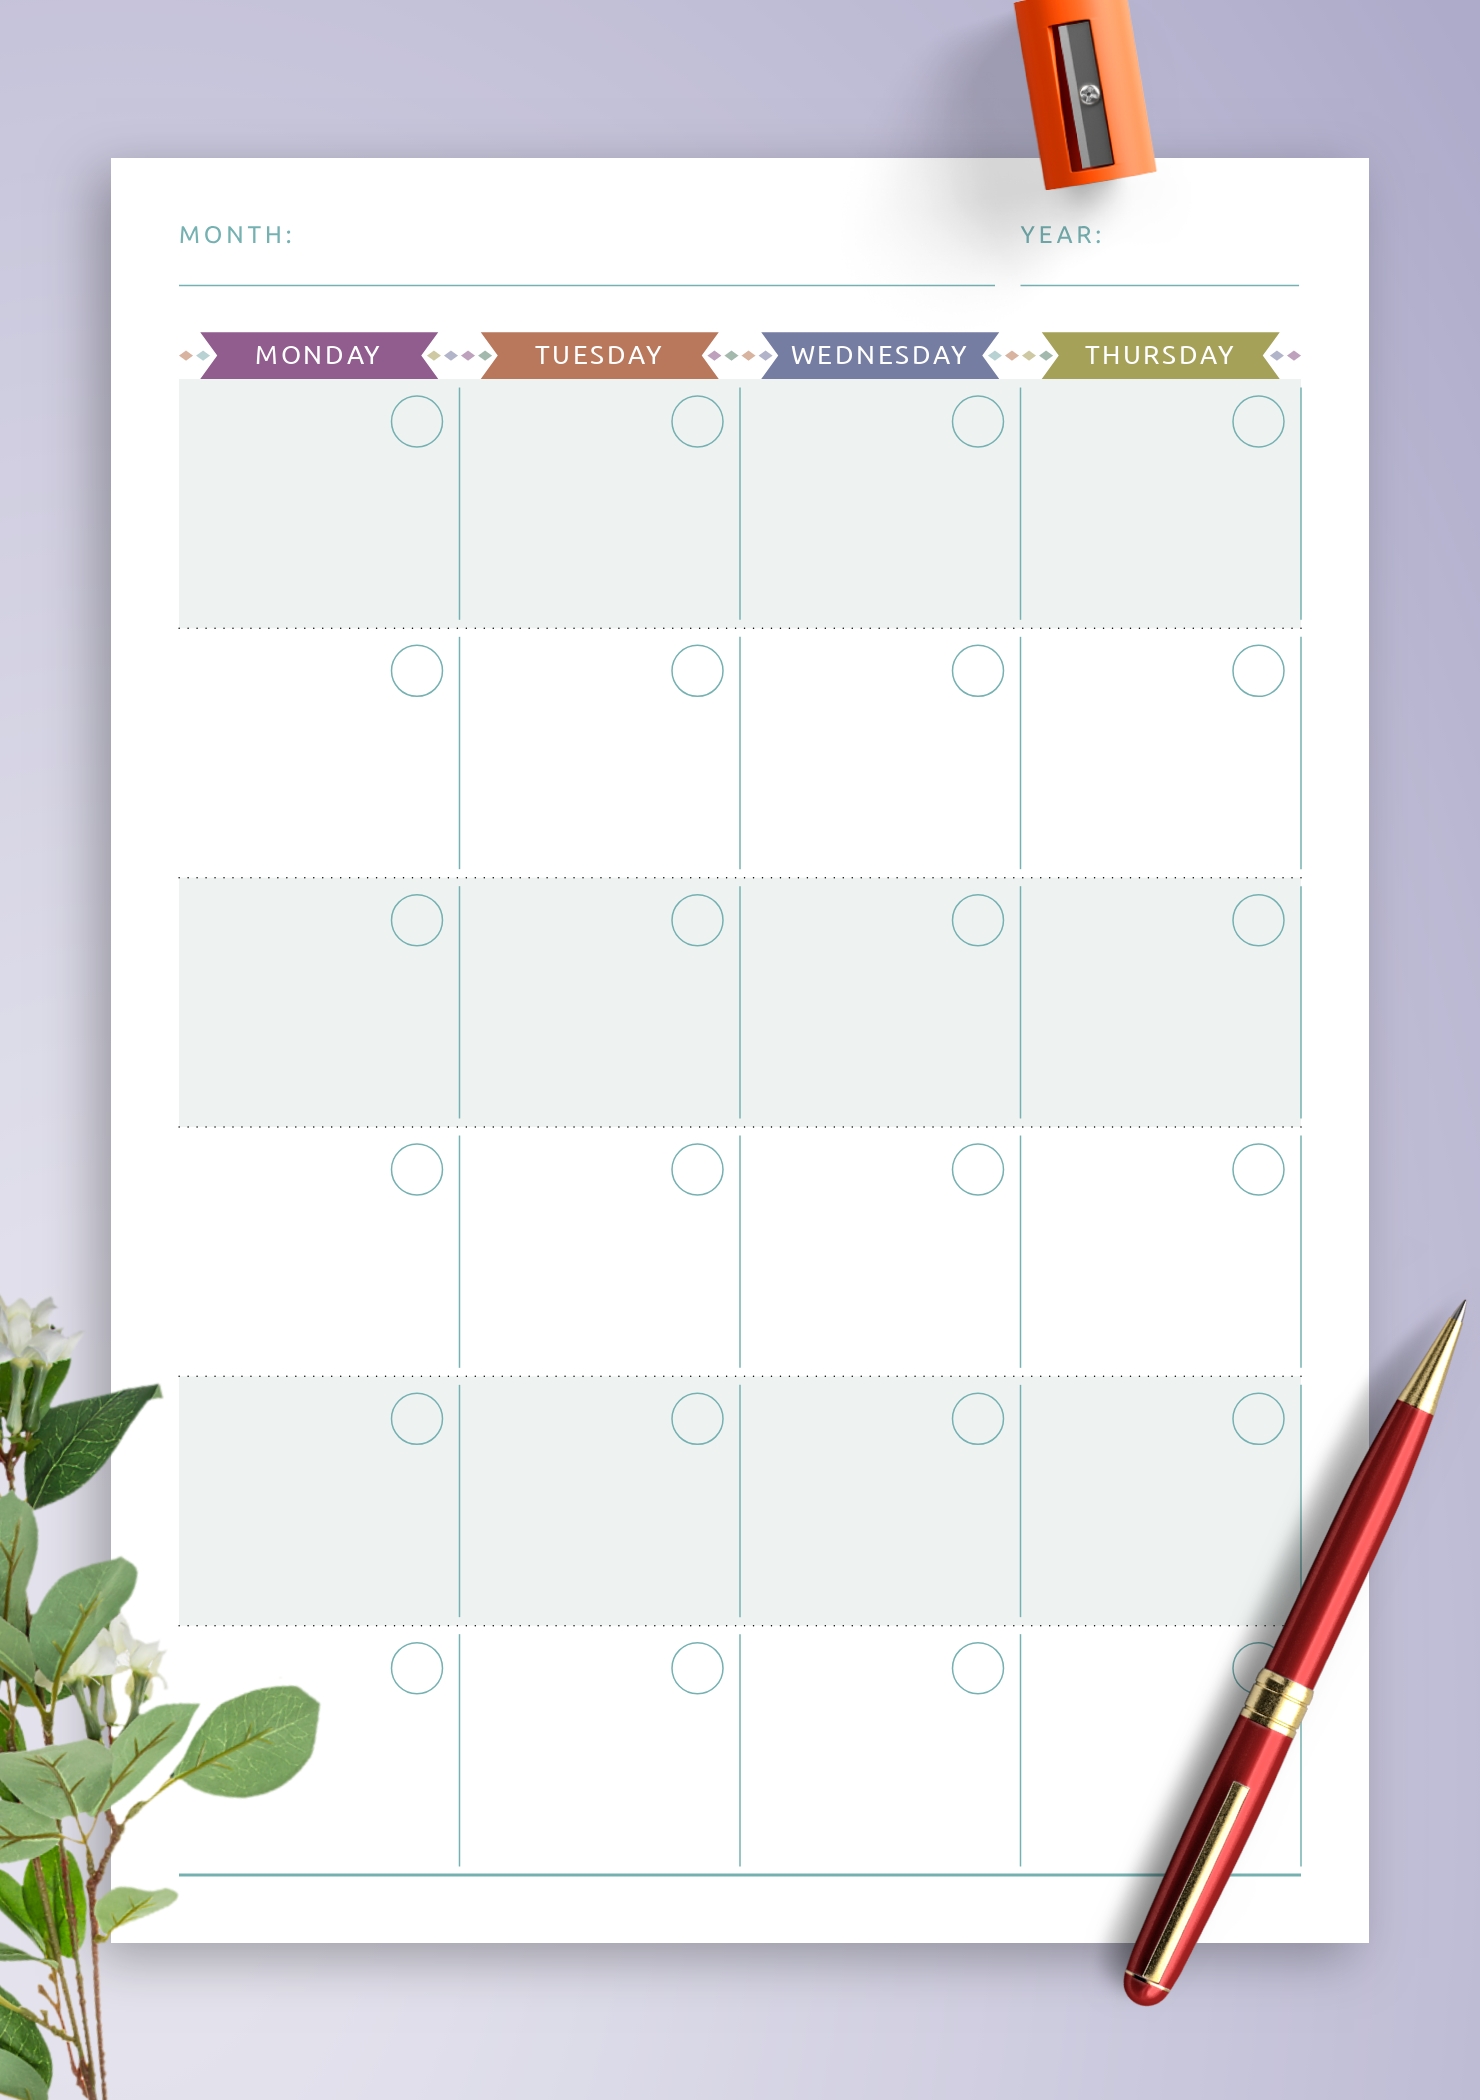 Download Printable Monthly Calendar Planner Undated - Casual